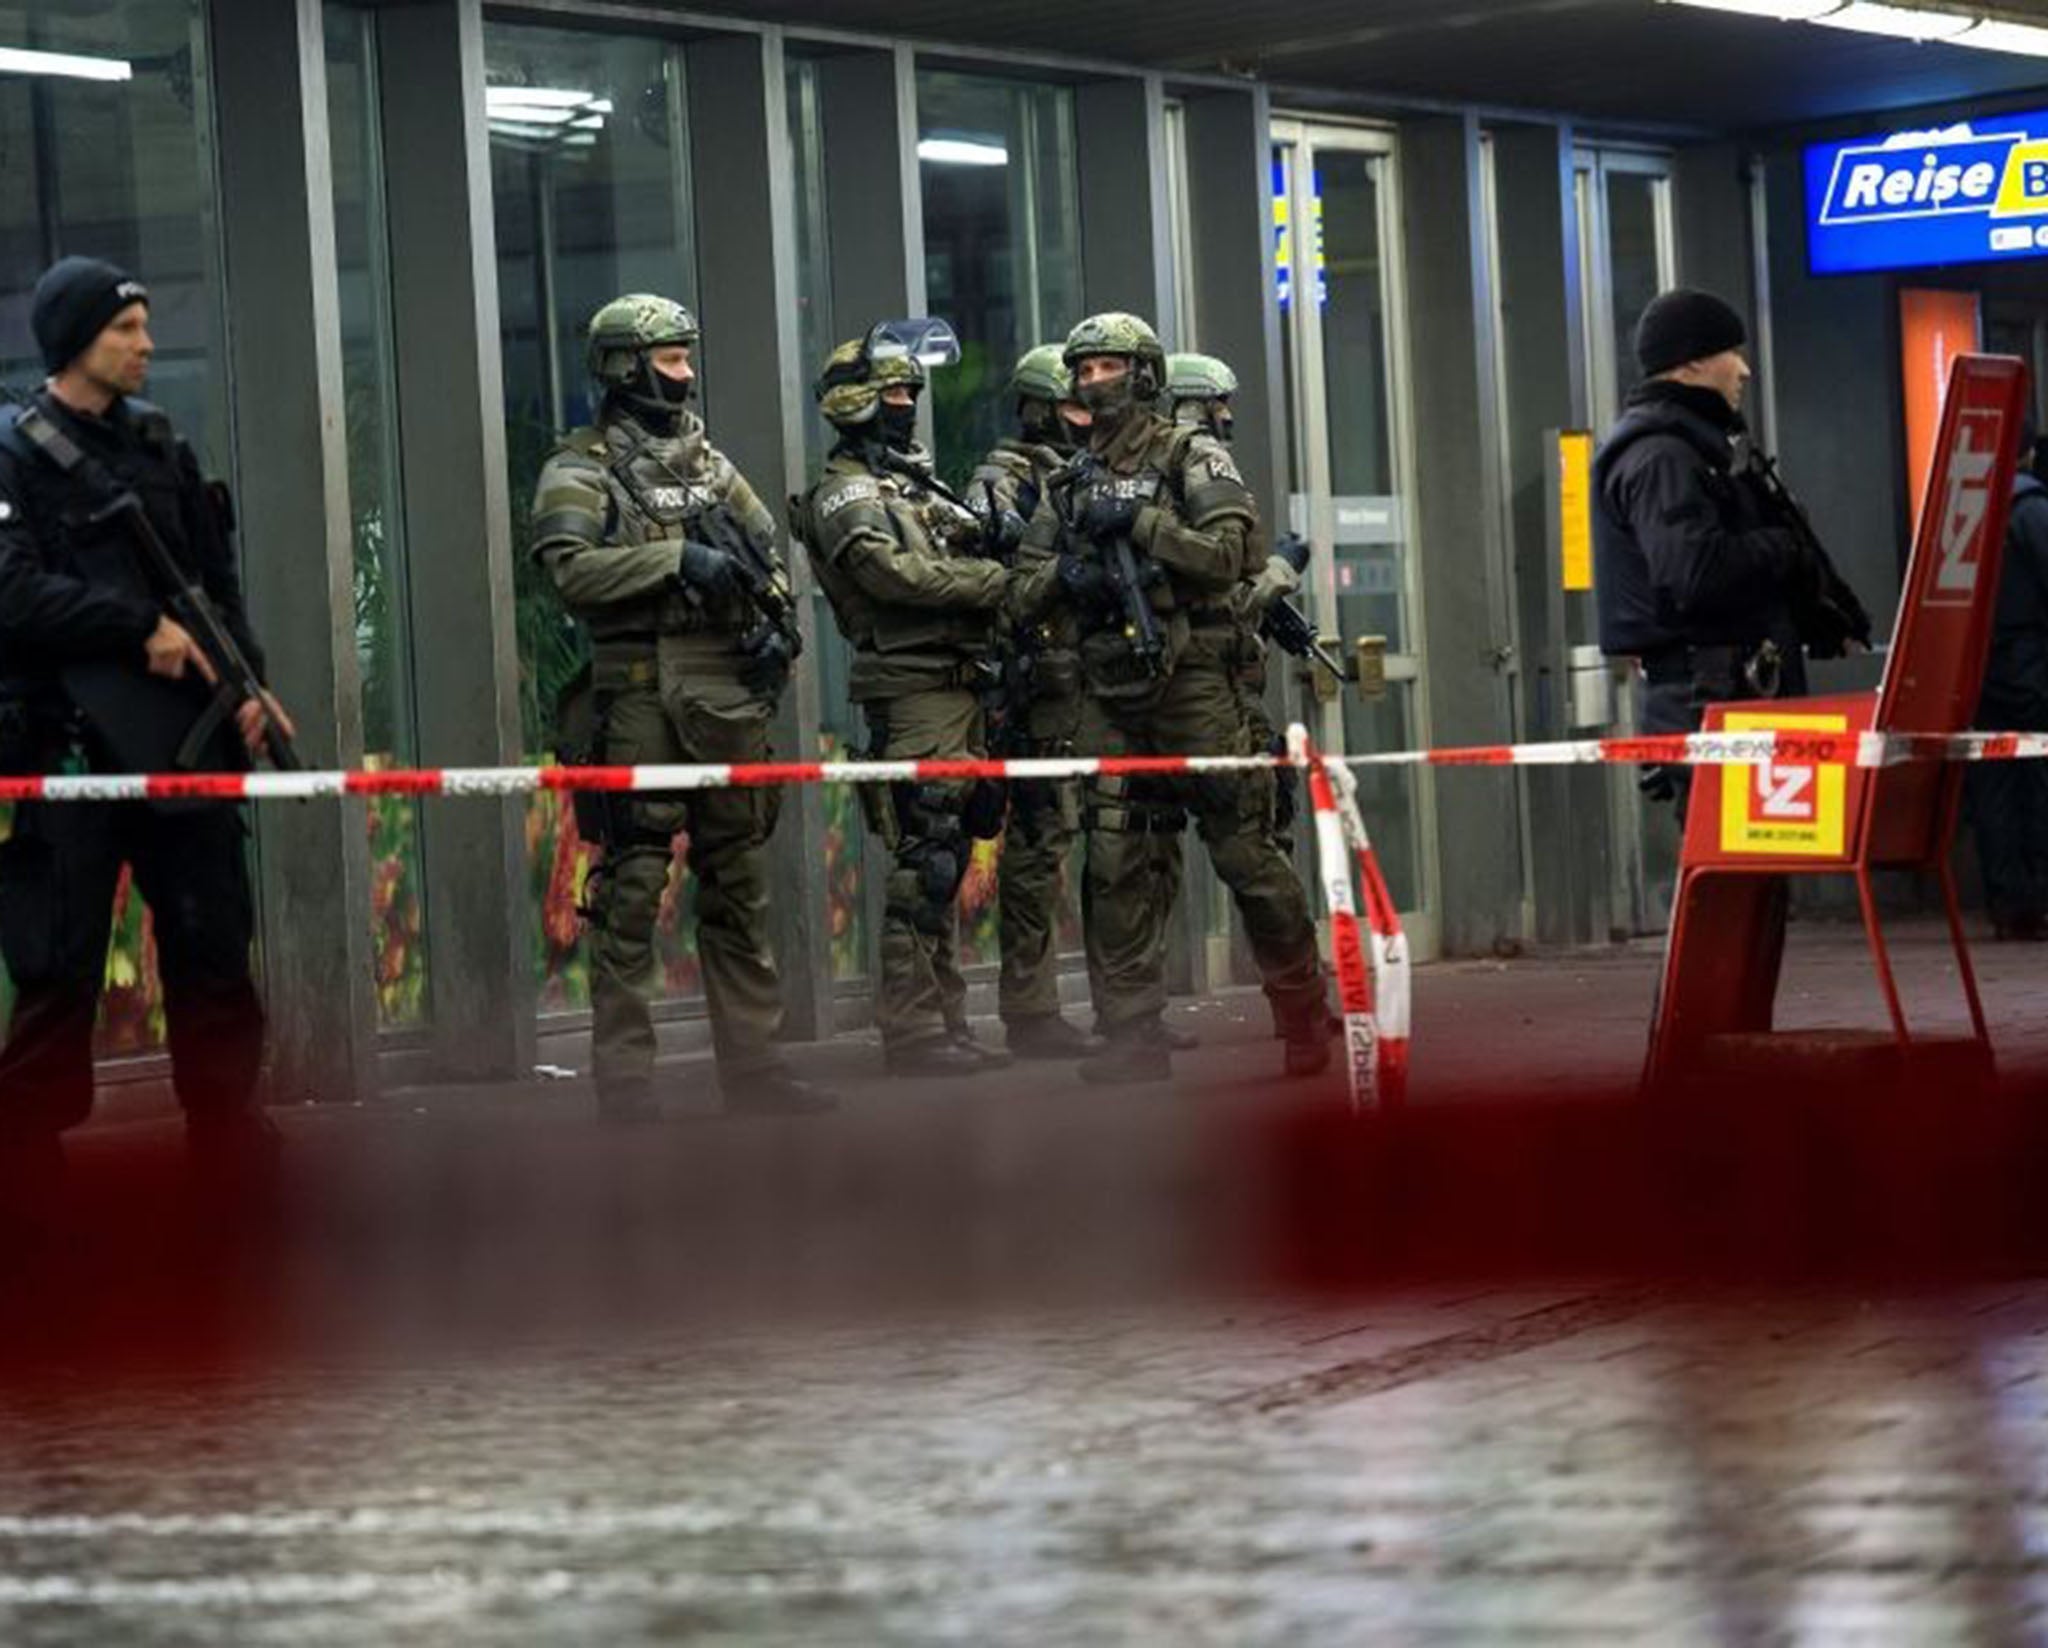 Armed police stand guard outside the evacuated railway station in Munich, Germany after reports of a 'serious' terror threat on New Year's Eve